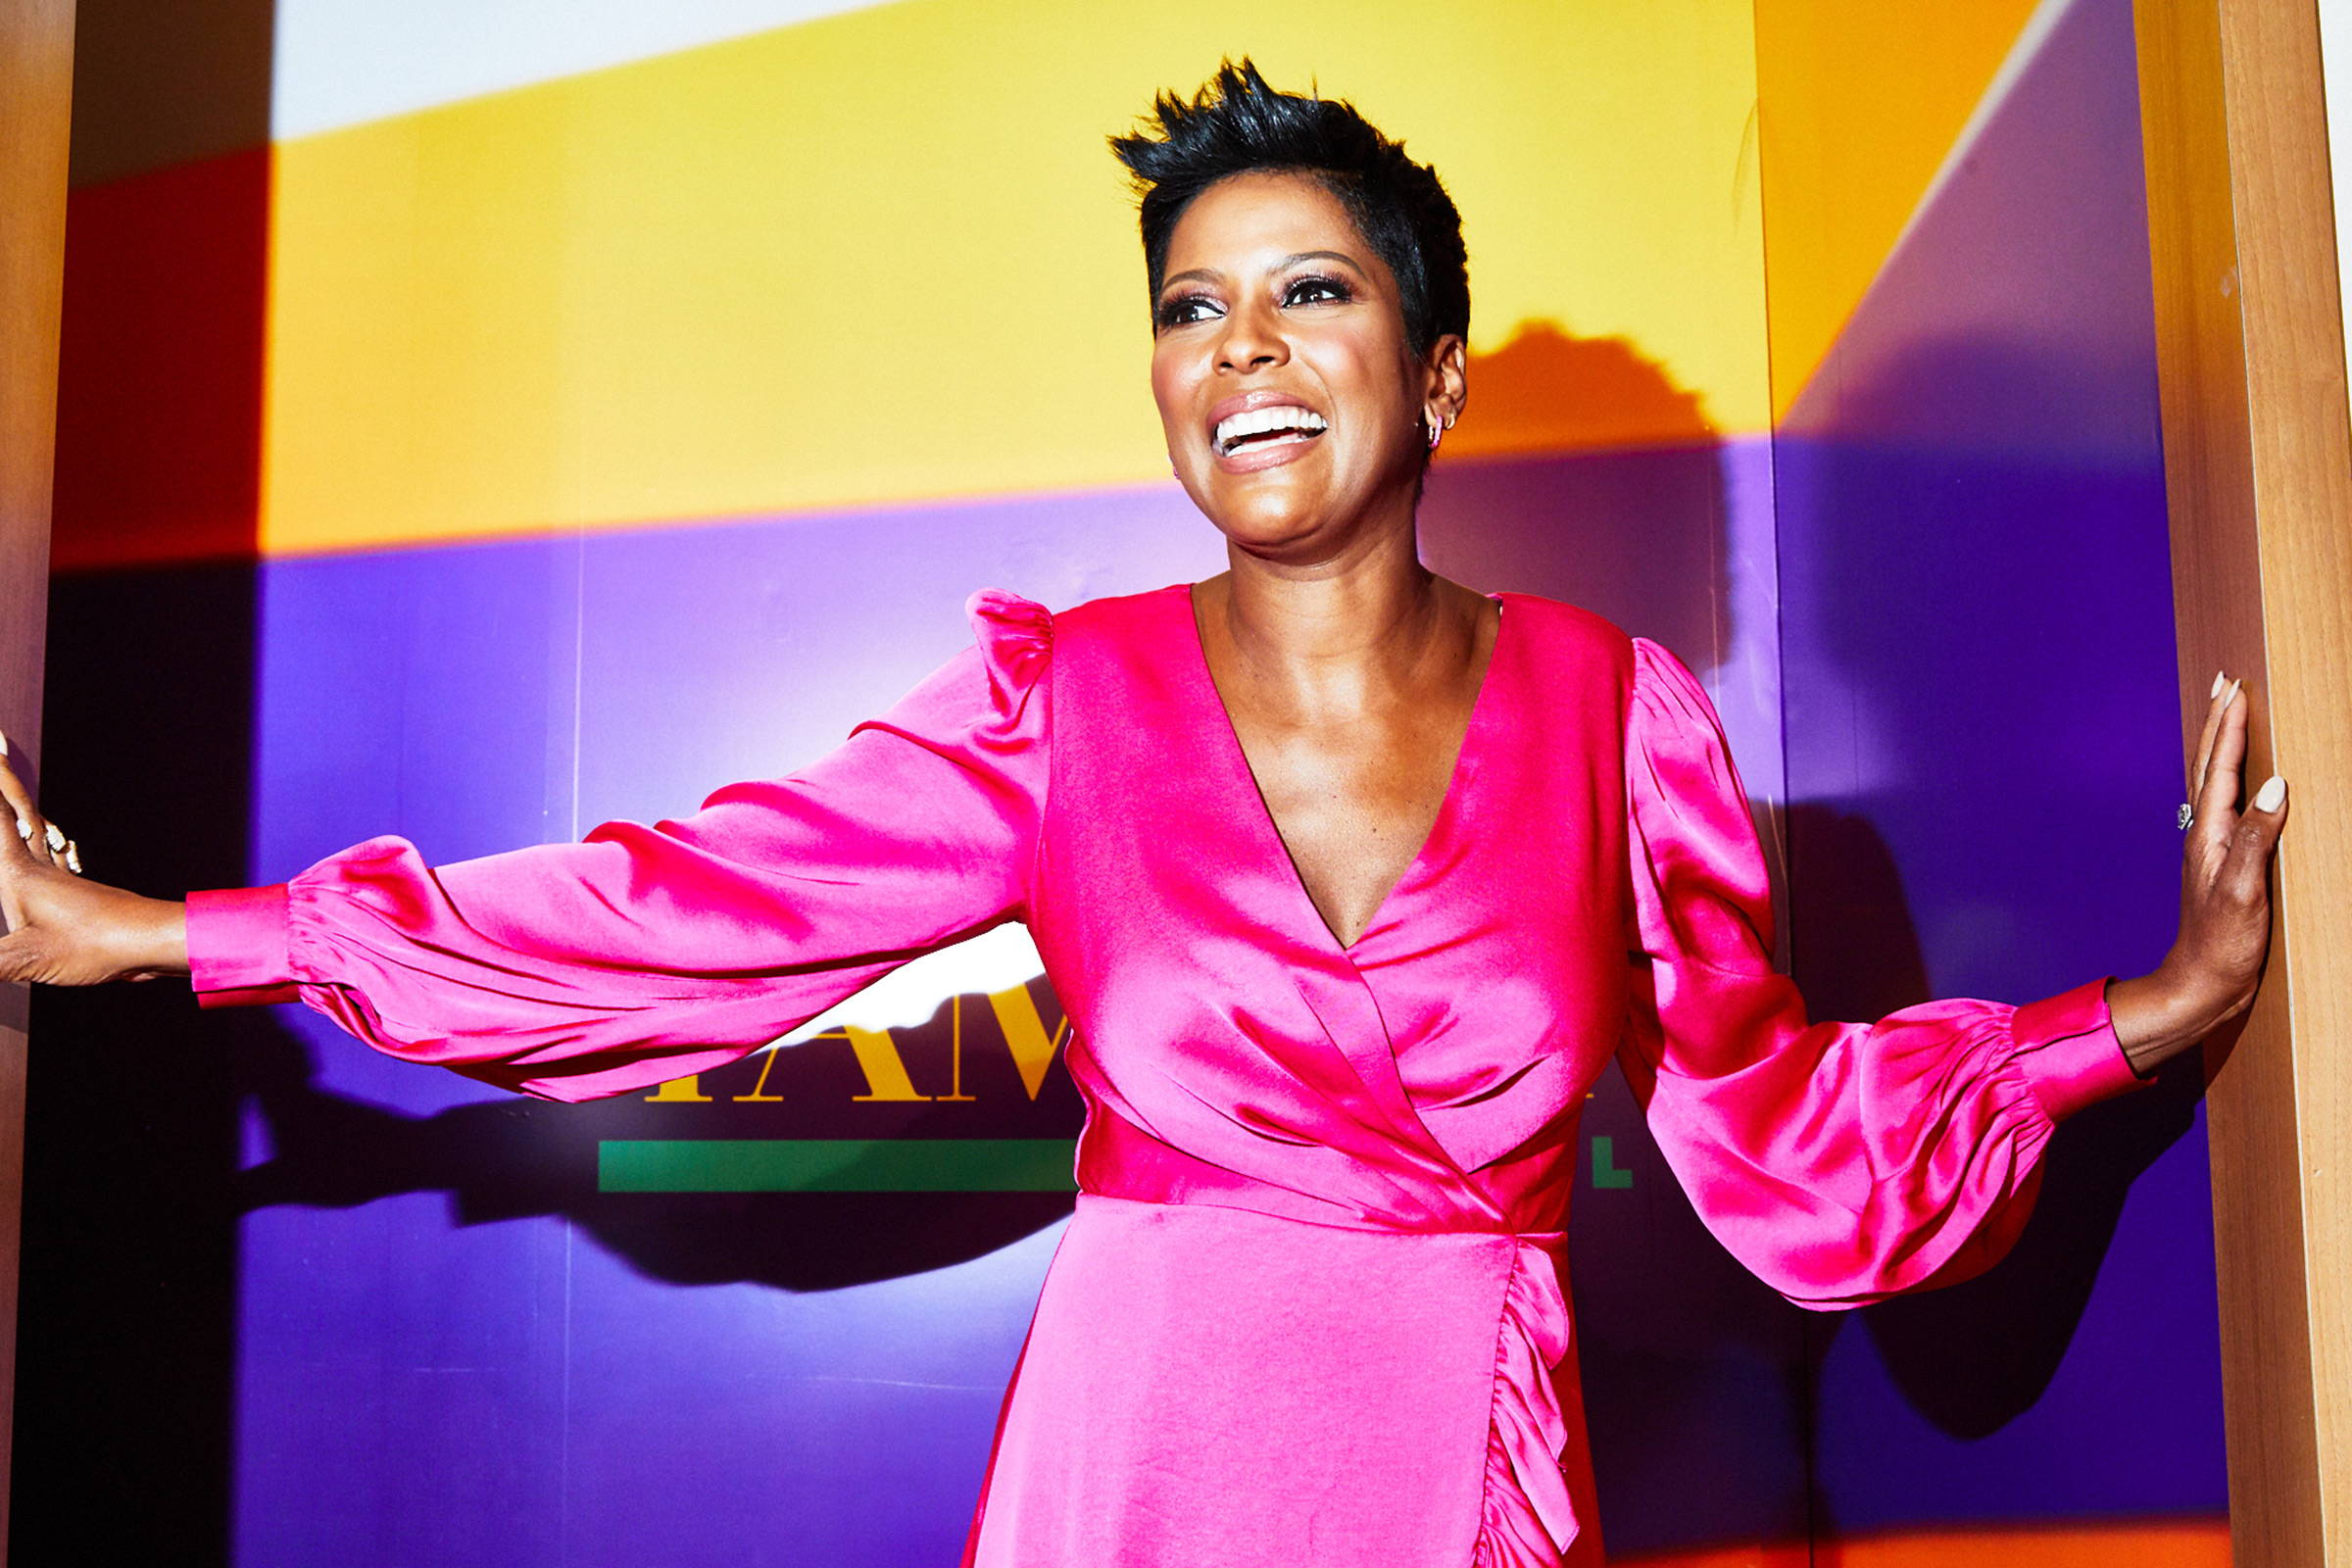 Talk show host Tamron Hall photographed on the set of her new show Aug. 28, 2019 (Amy Lombard for TIME)